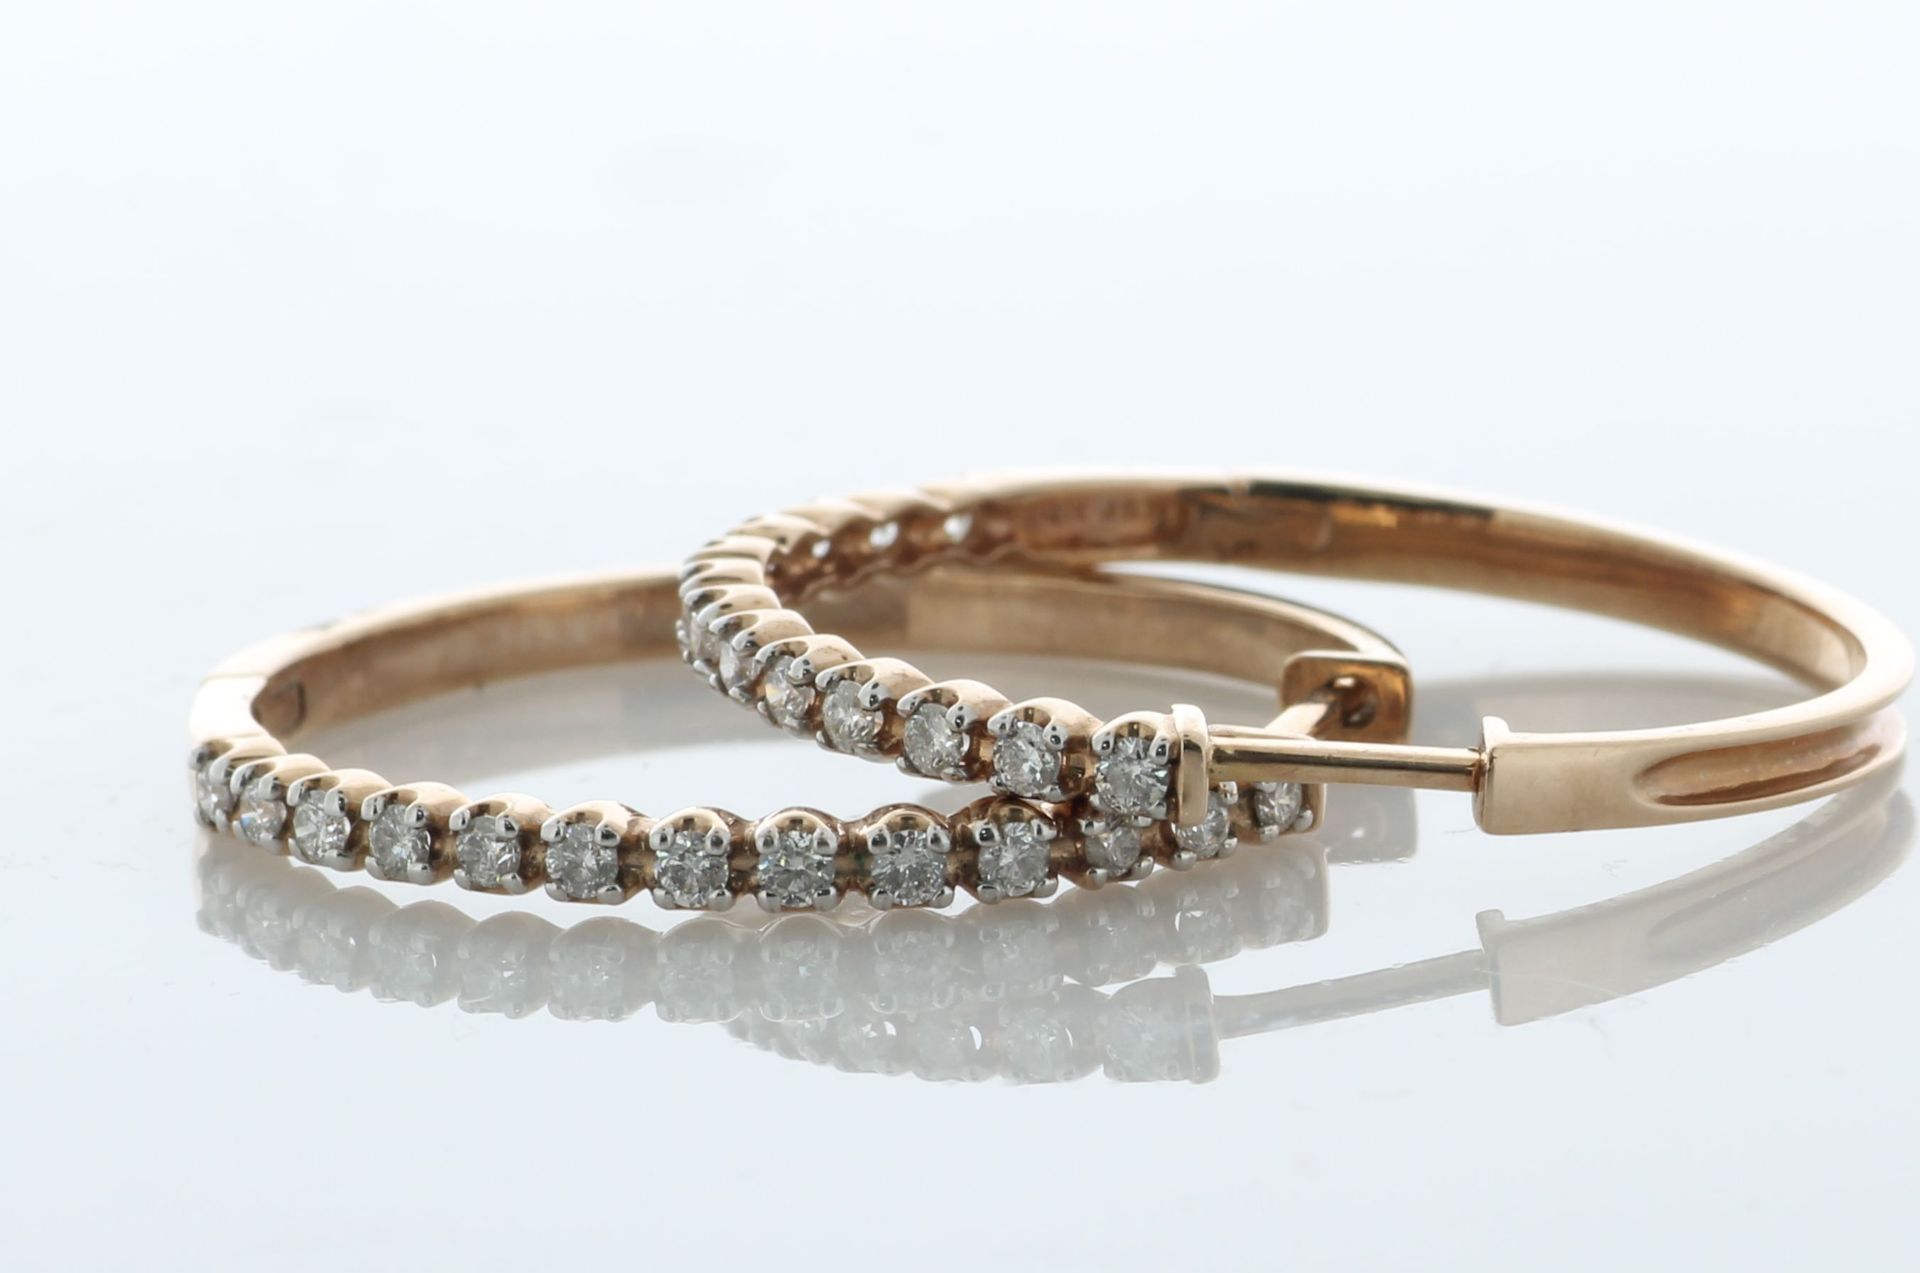 10ct Rose Gold Diamond Hoop Earrings 0.50 Carats - Valued By AGI £2,855.00 - These gorgeous 10ct